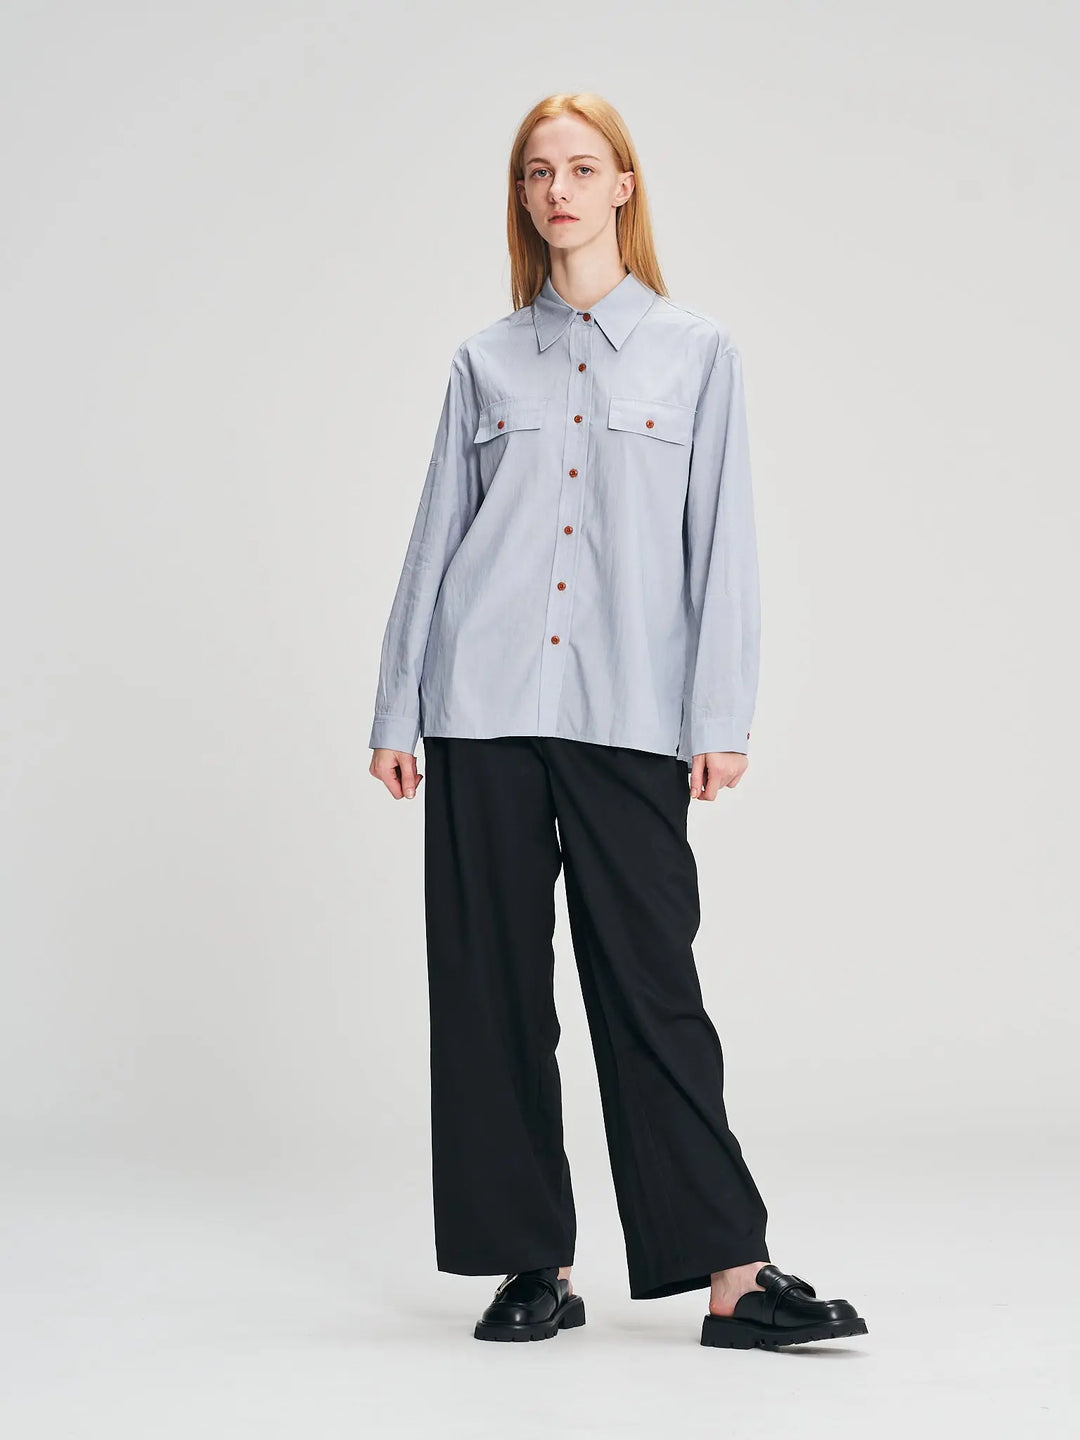 An image of a  Blue-One-Size YT3066 Front Flap Shirt by  Mirra Masa